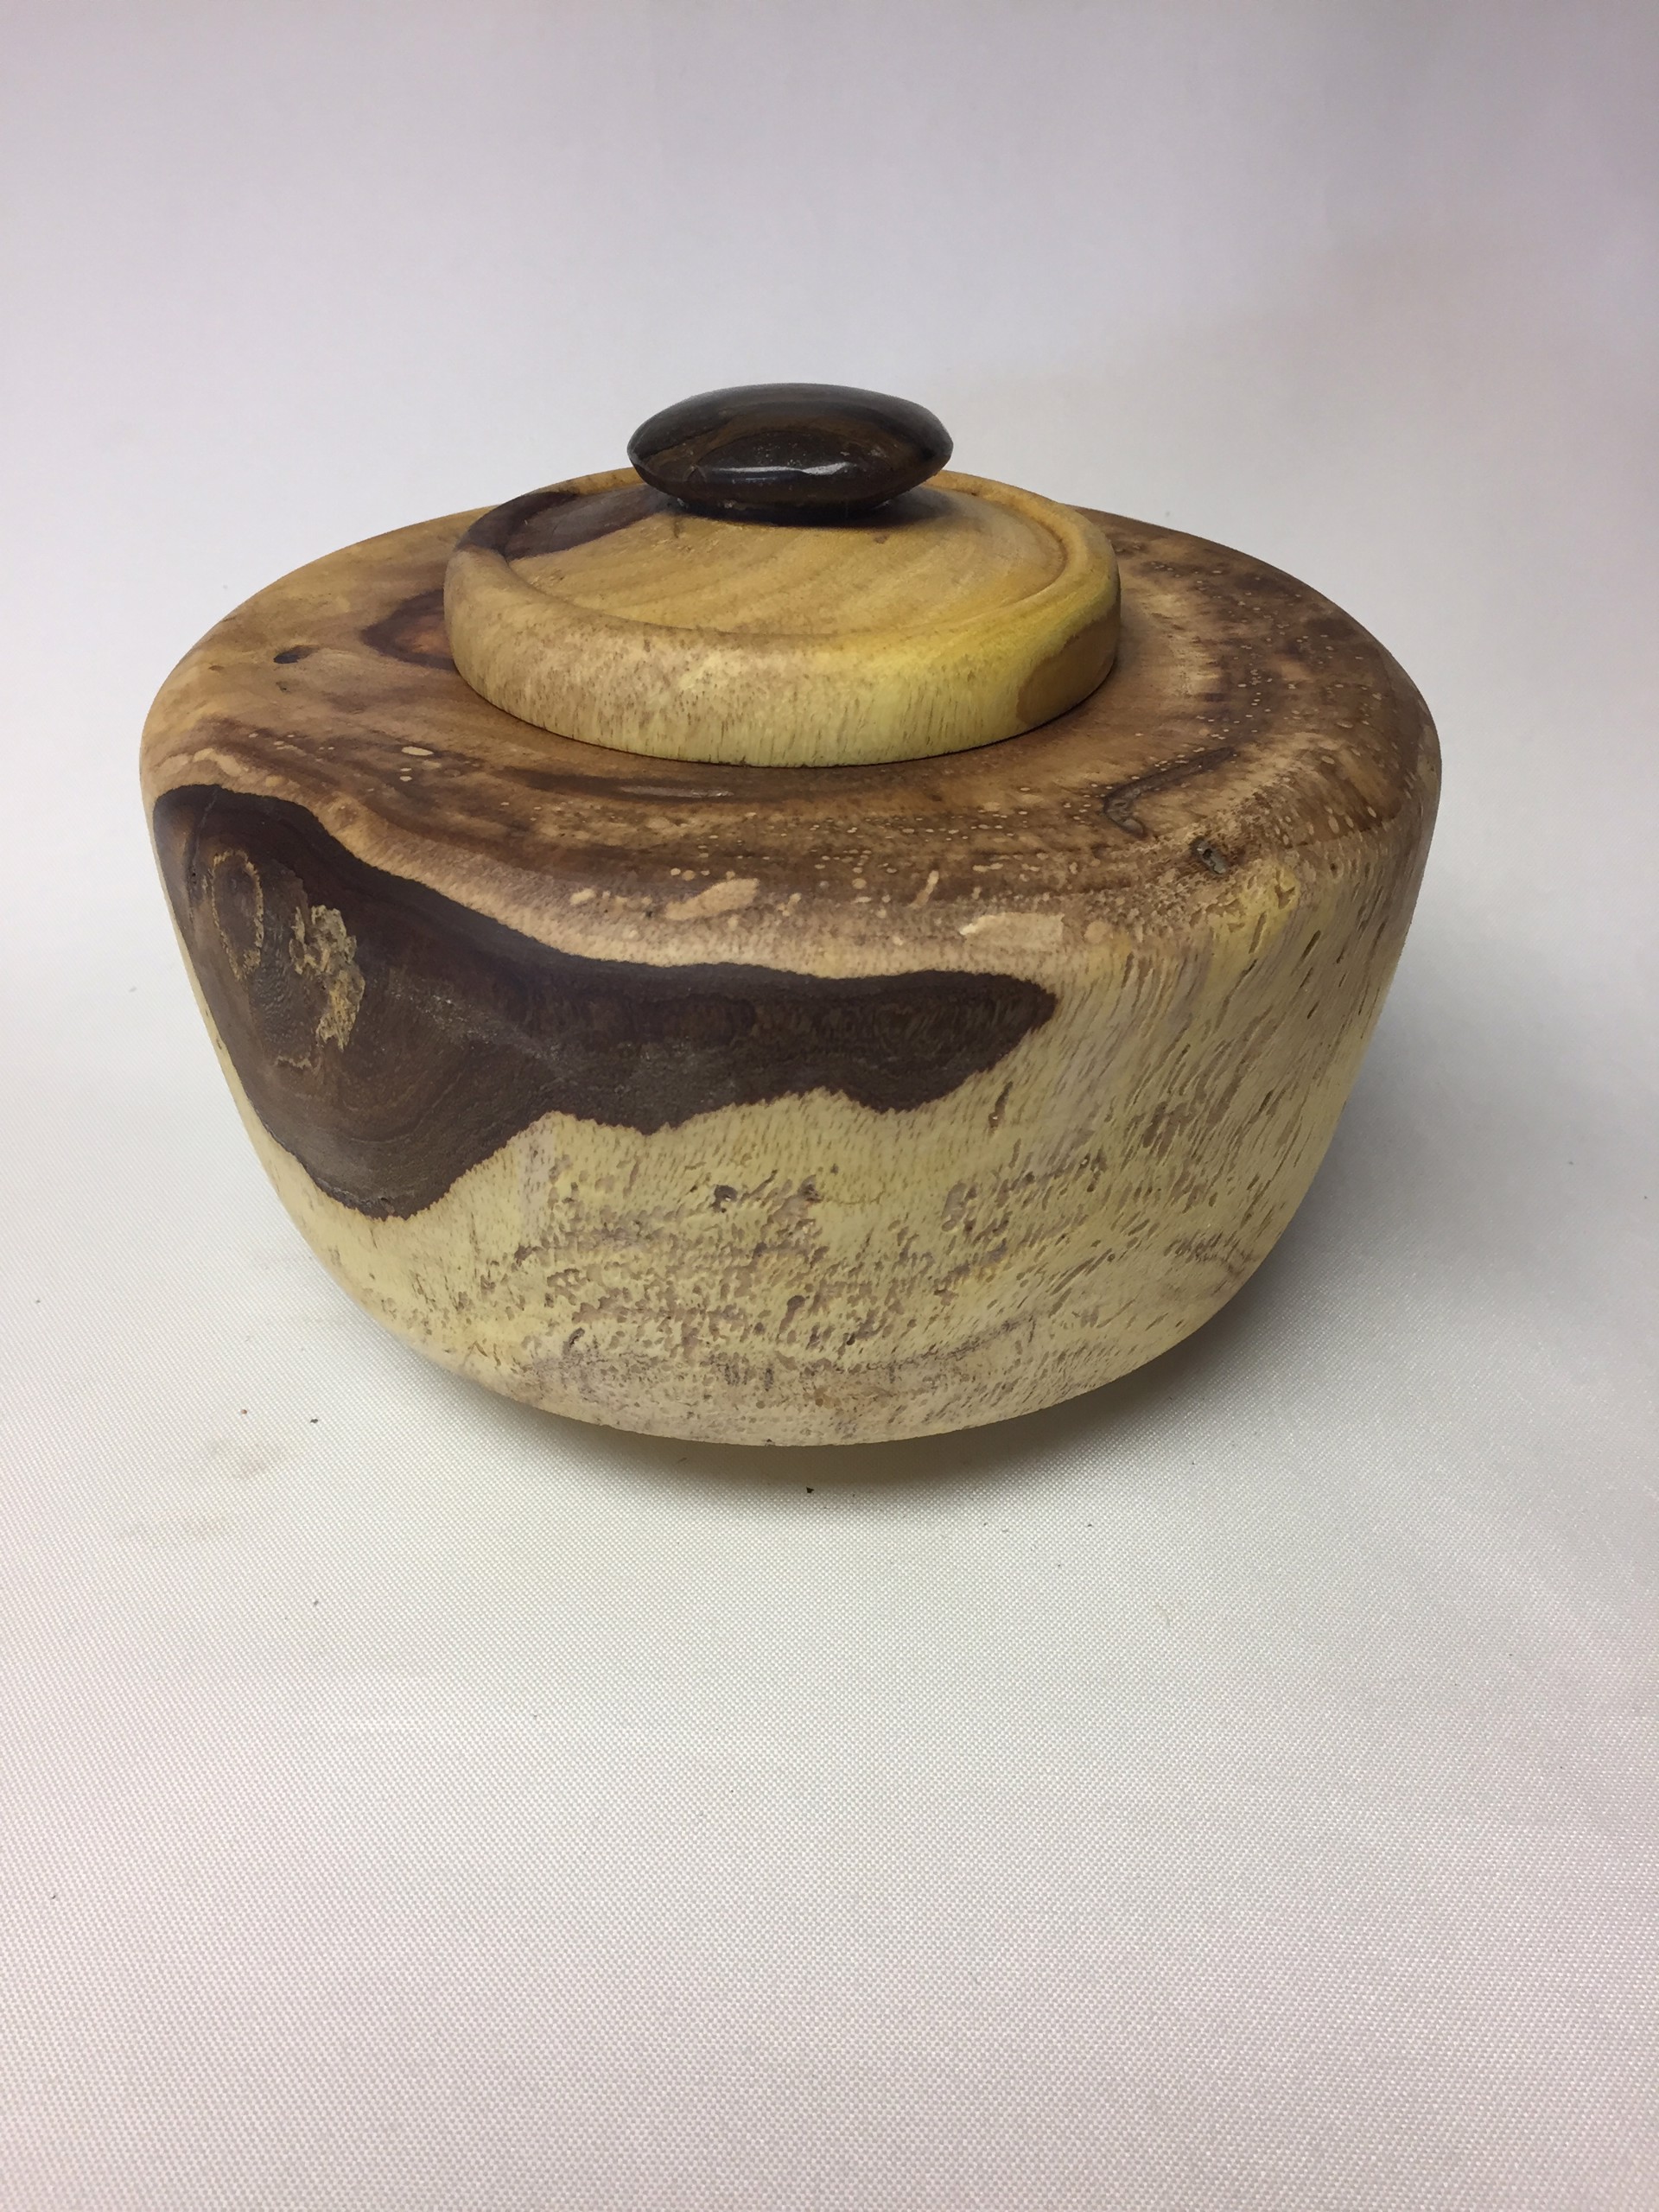 Turned Wood Jar W/Lid #21-86 by Rick Squires